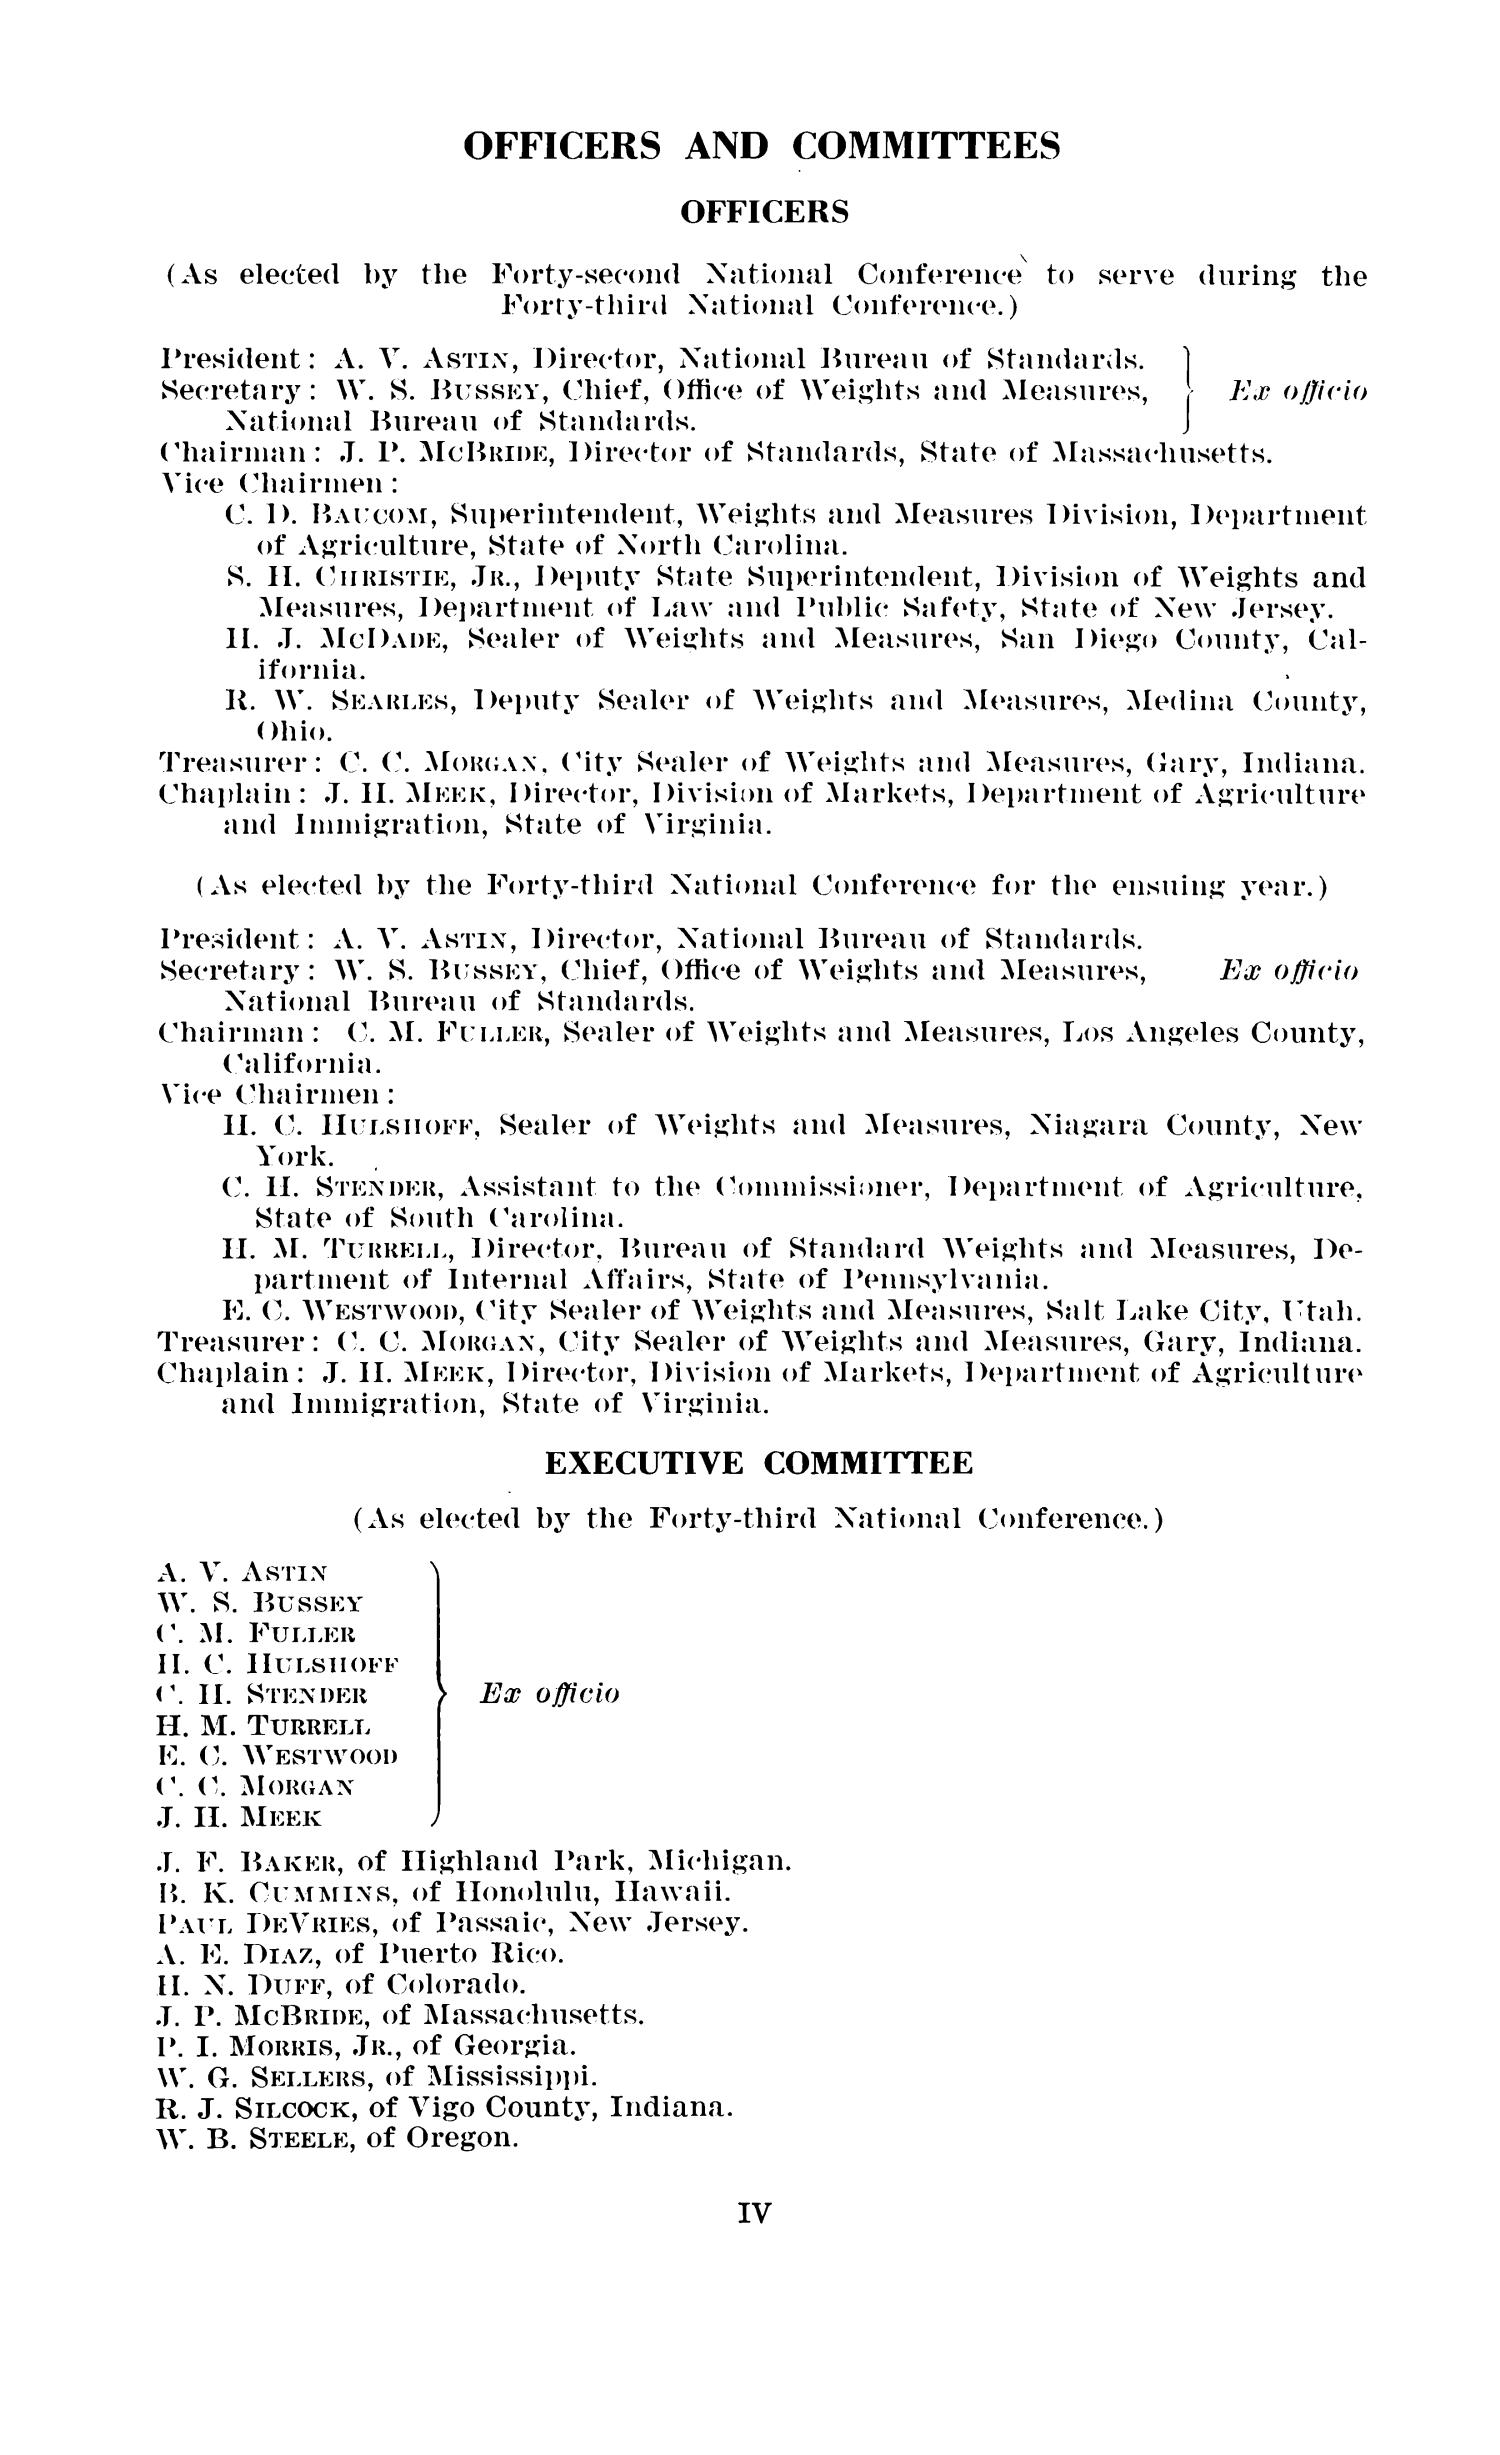 Report of the Forty-Third National Conference on Weights and Measures, 1958
                                                
                                                    IV
                                                